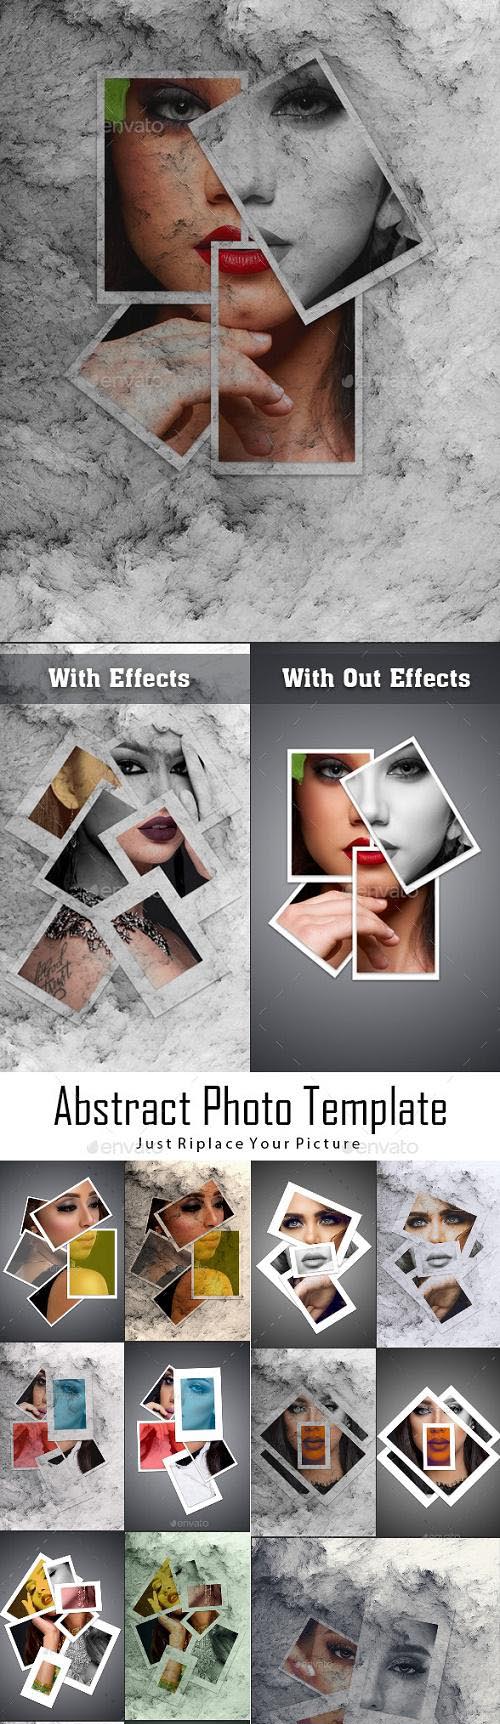 Abstract Photo Template 23805103